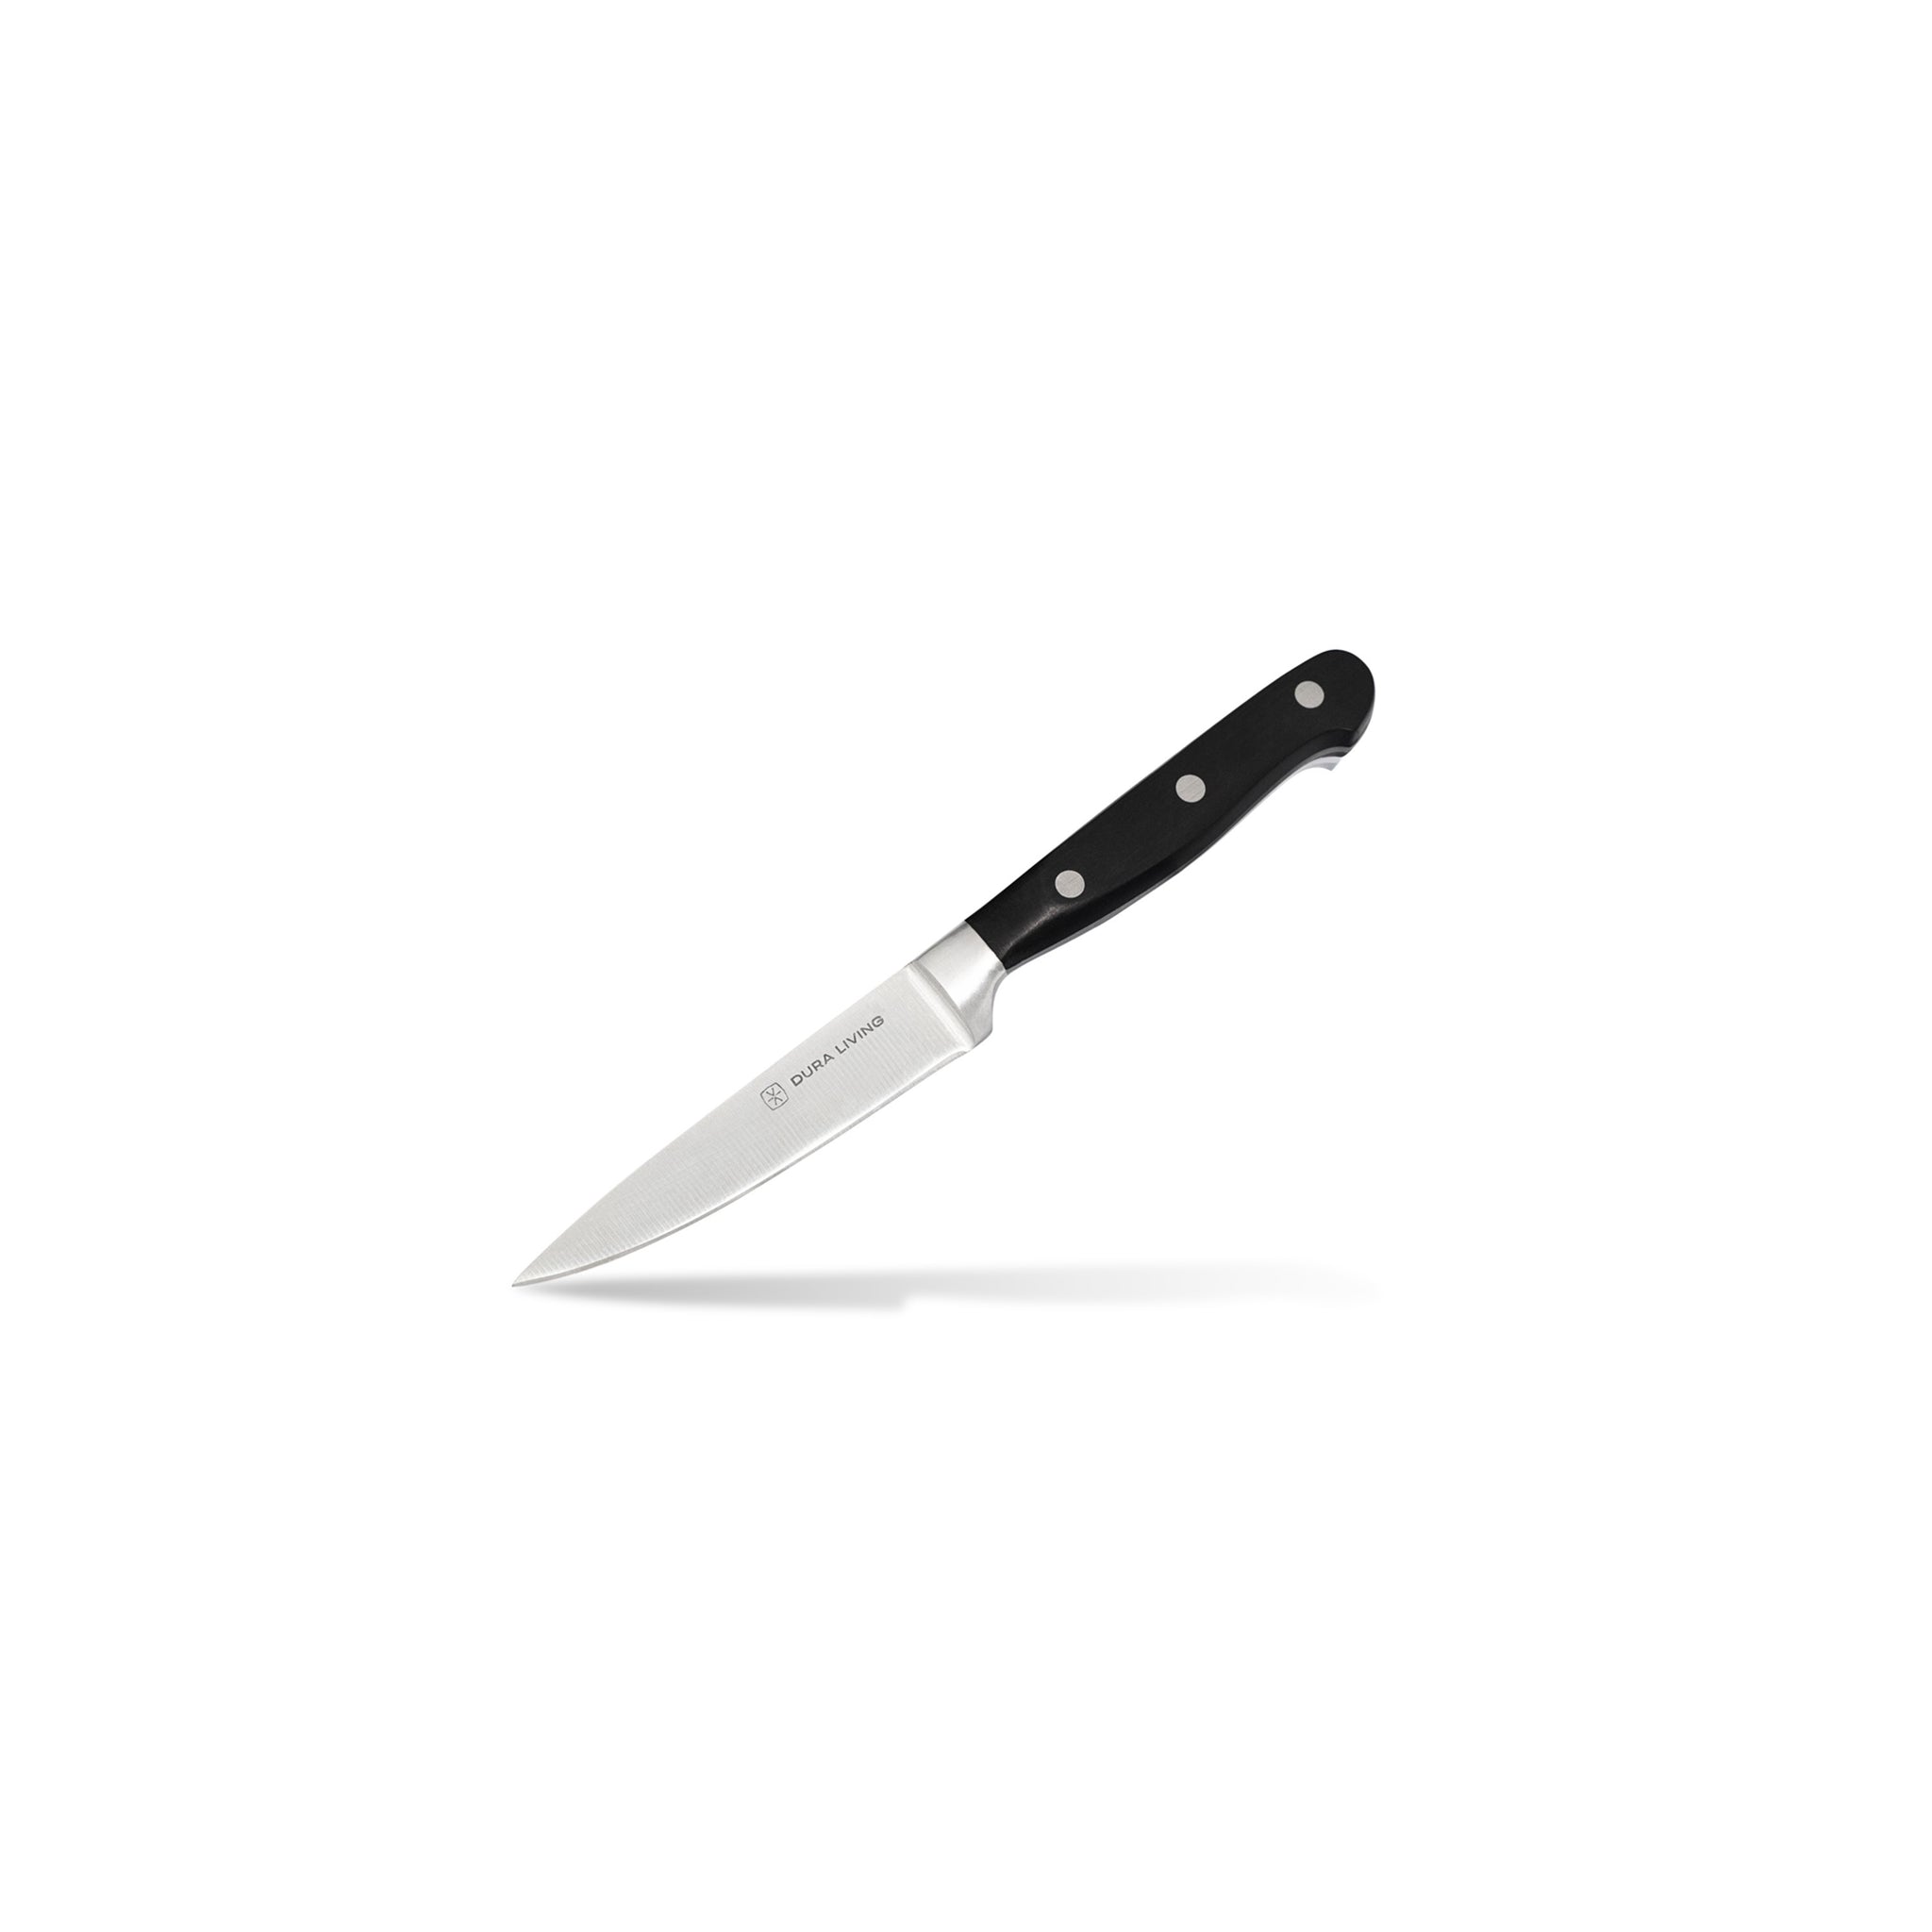  DURA LIVING Paring Knife, 3.5 Inch Professional Cook's Kitchen  Knife, German High Carbon Stainless Steel Ultra Sharp Knife, Multi-Purpose  Small Kitchen Knives, Black Knife: Home & Kitchen